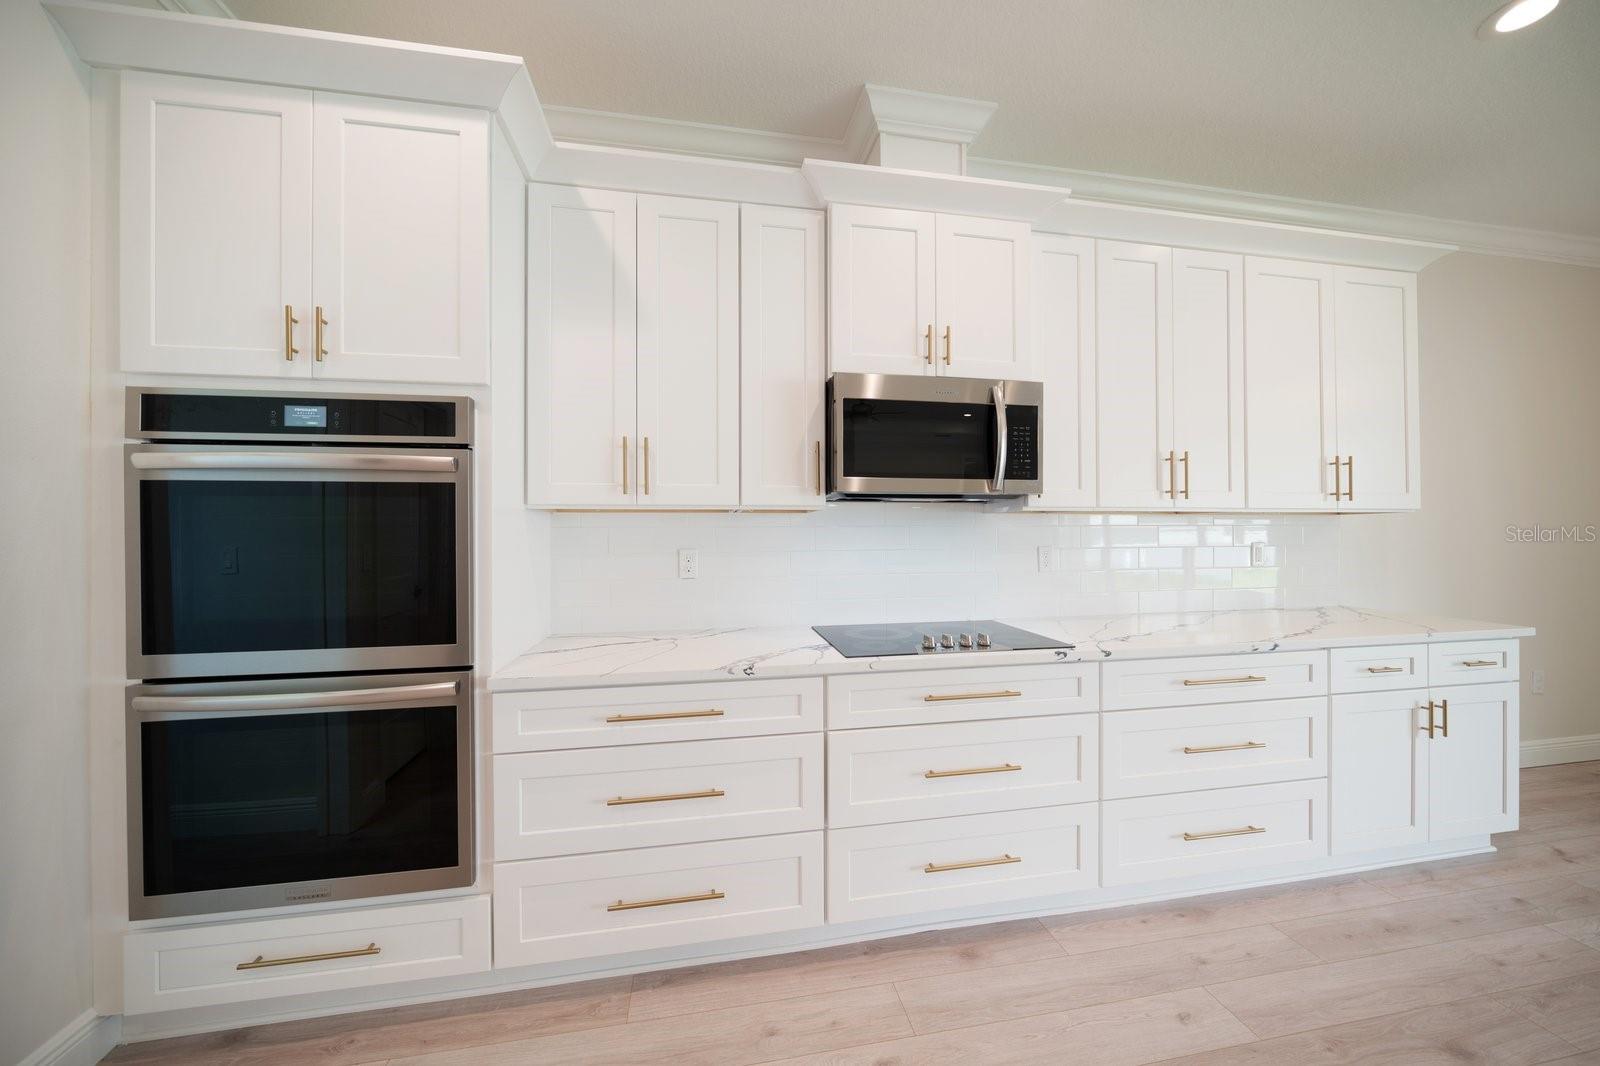 Double Ovens White cabinetry